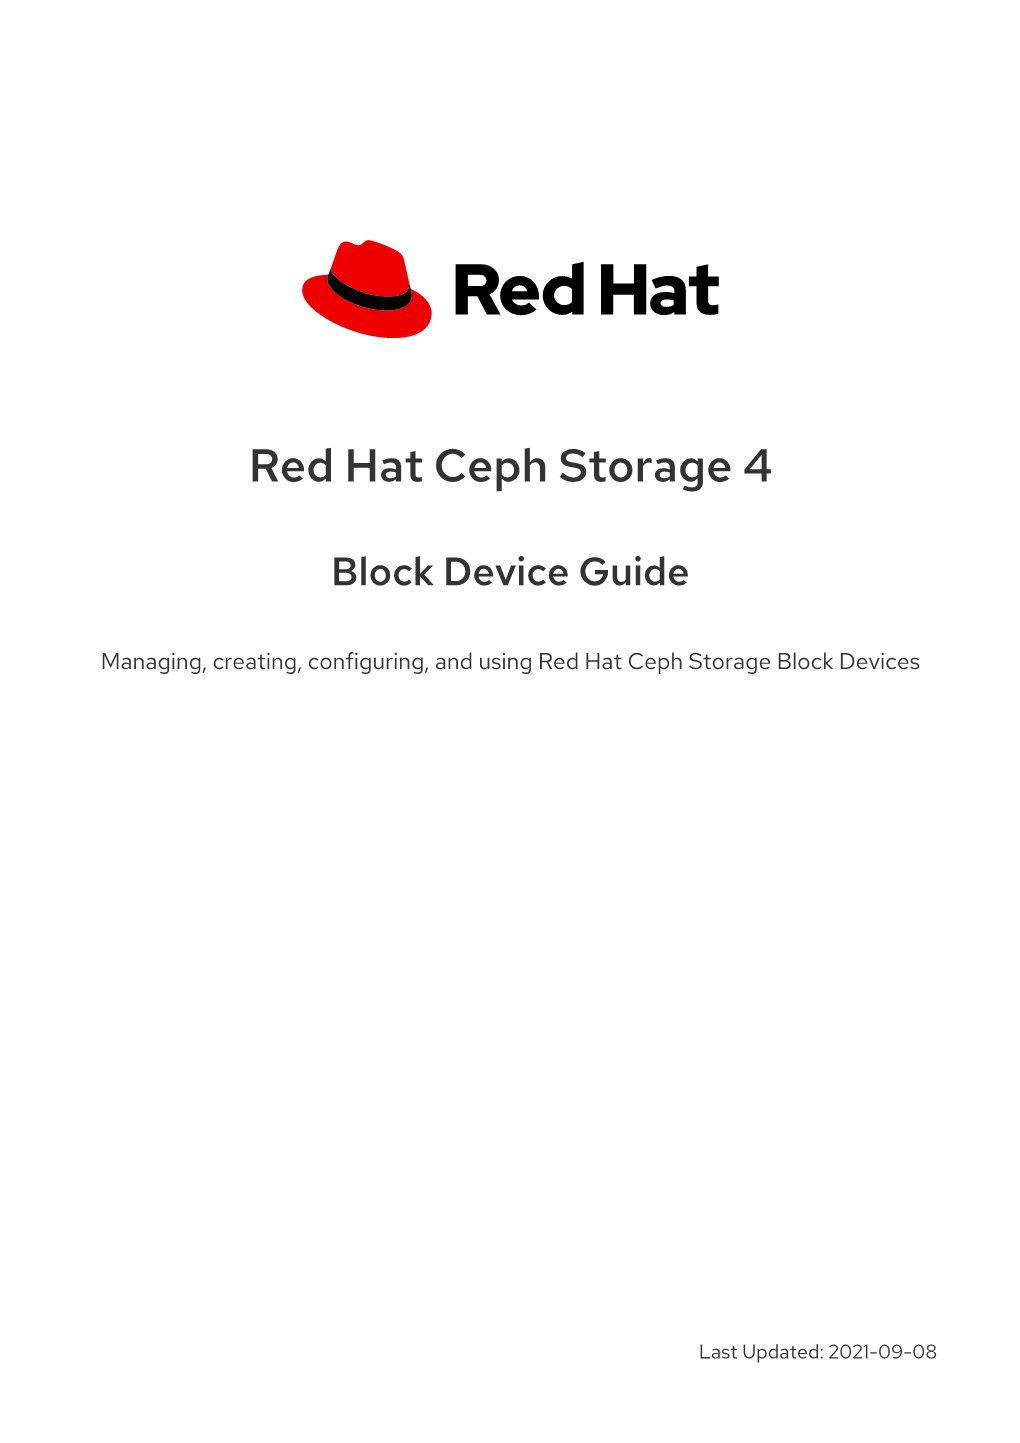 Red Hat Ceph Storage 4 Block Device Guide